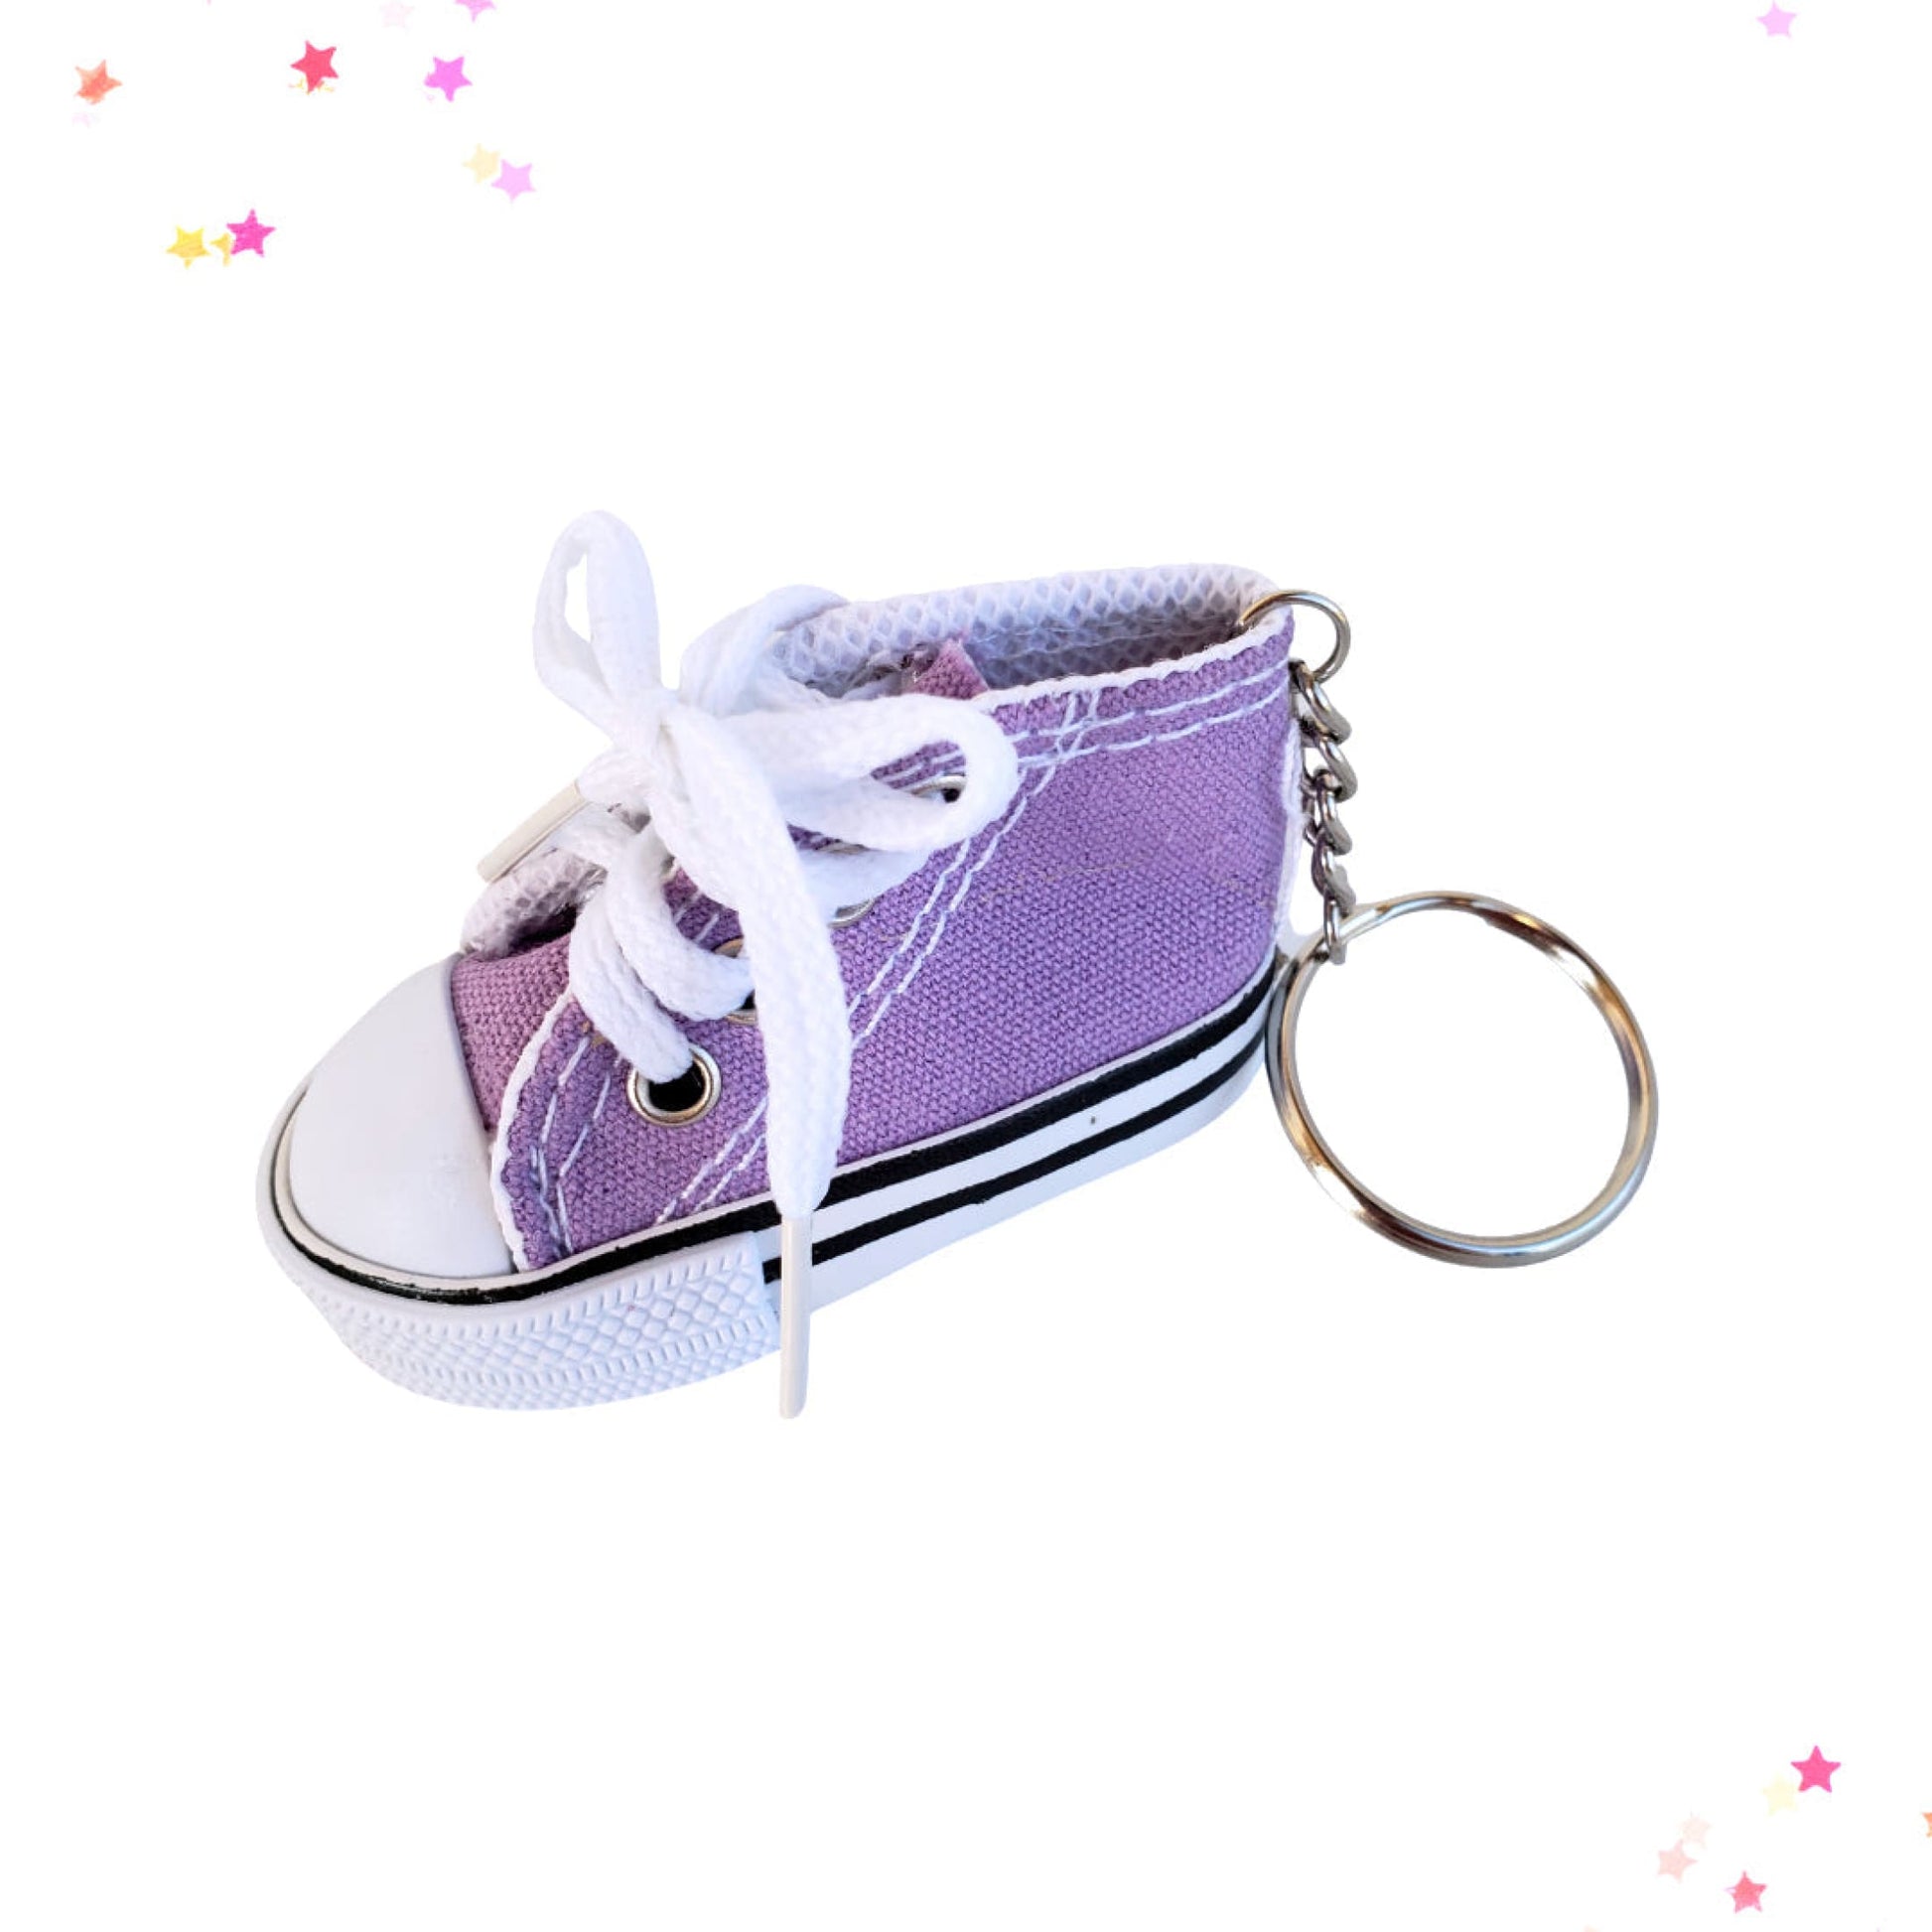 High Top Sneaker Shoe Keychain Bag Charm in Light Purple from Confetti Kitty, Only 7.99